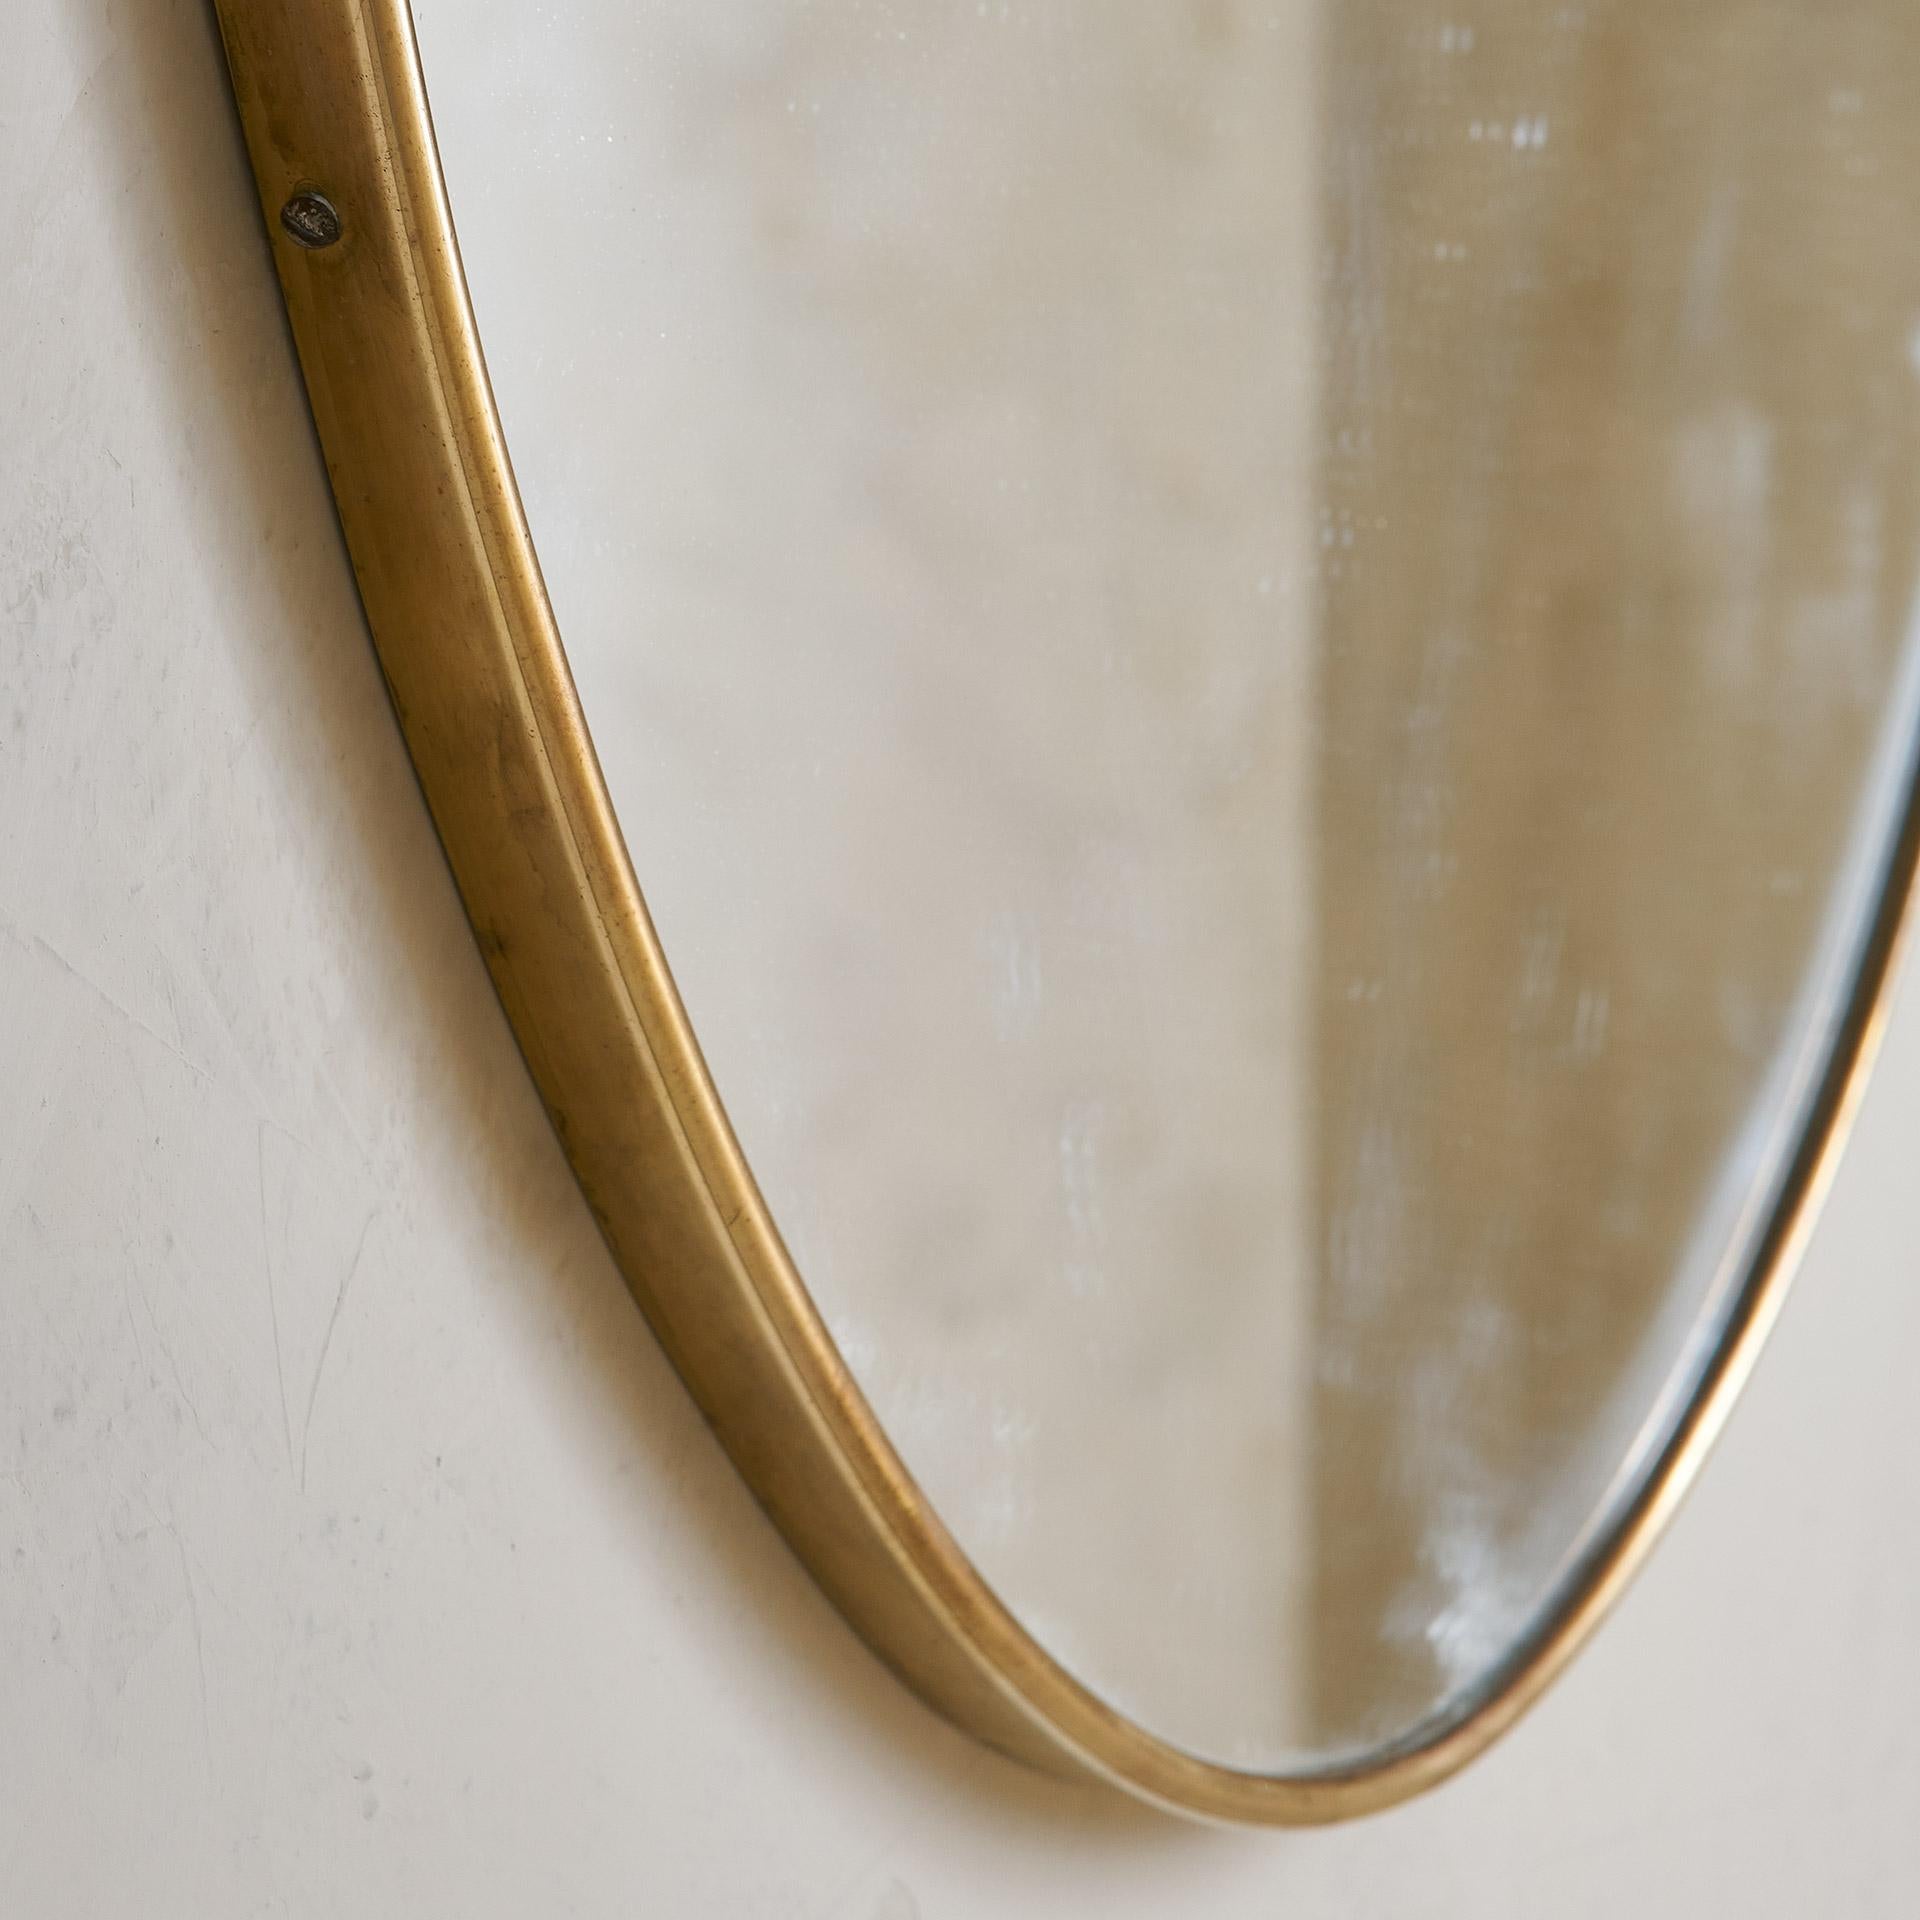 A vintage Italian brass mirror in the shape of a shield. Unlacquered brass + original glass.